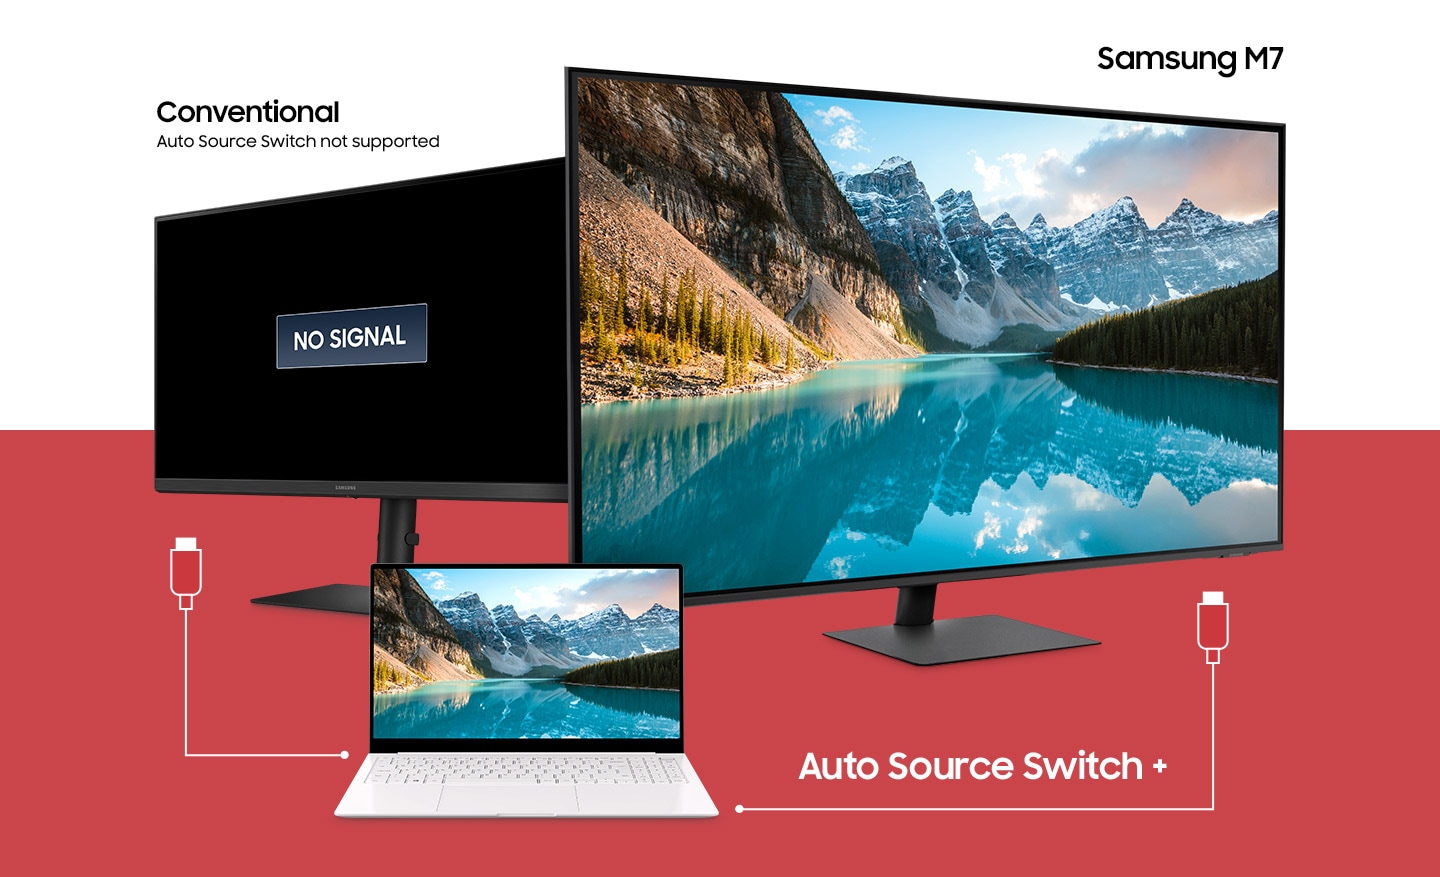 A laptop sits in between two monitors. The laptop has two different cables attempting to connect to the monitors. Above the left monitor, the text "Conventional, Auto Source Switch not supported" appears and a "No Signal" icon appears on the screen. Above the right monitor shows the text "Samsung M7" and a mountainous scene appears on the screen due to the Auto Source Switch+ functionality.